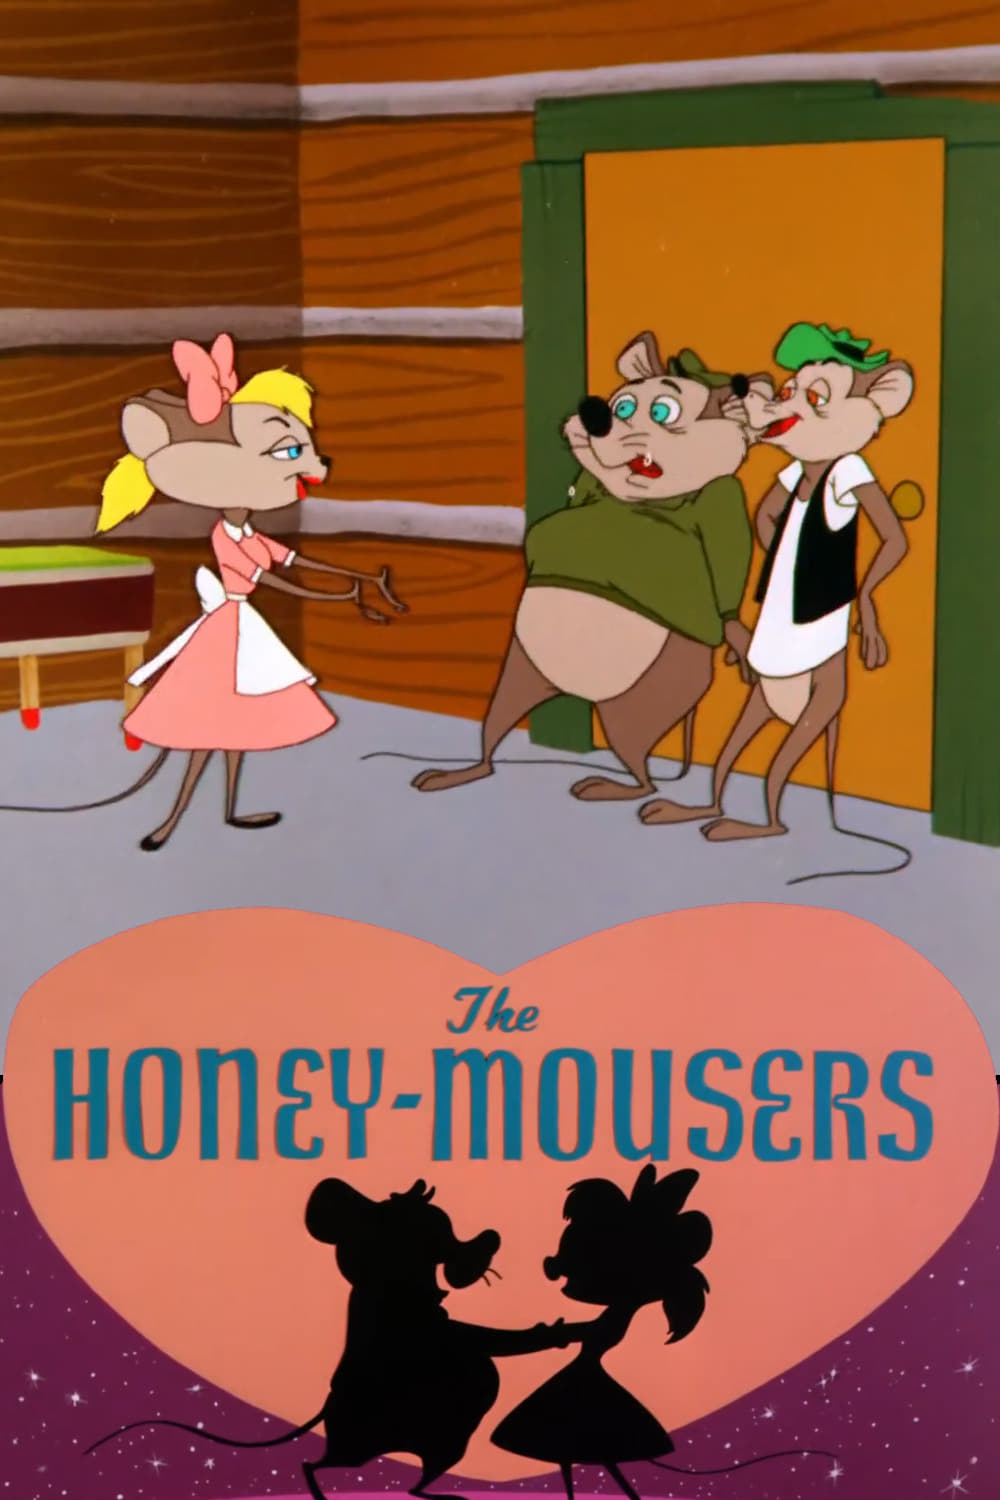 The Honey-Mousers (1956)